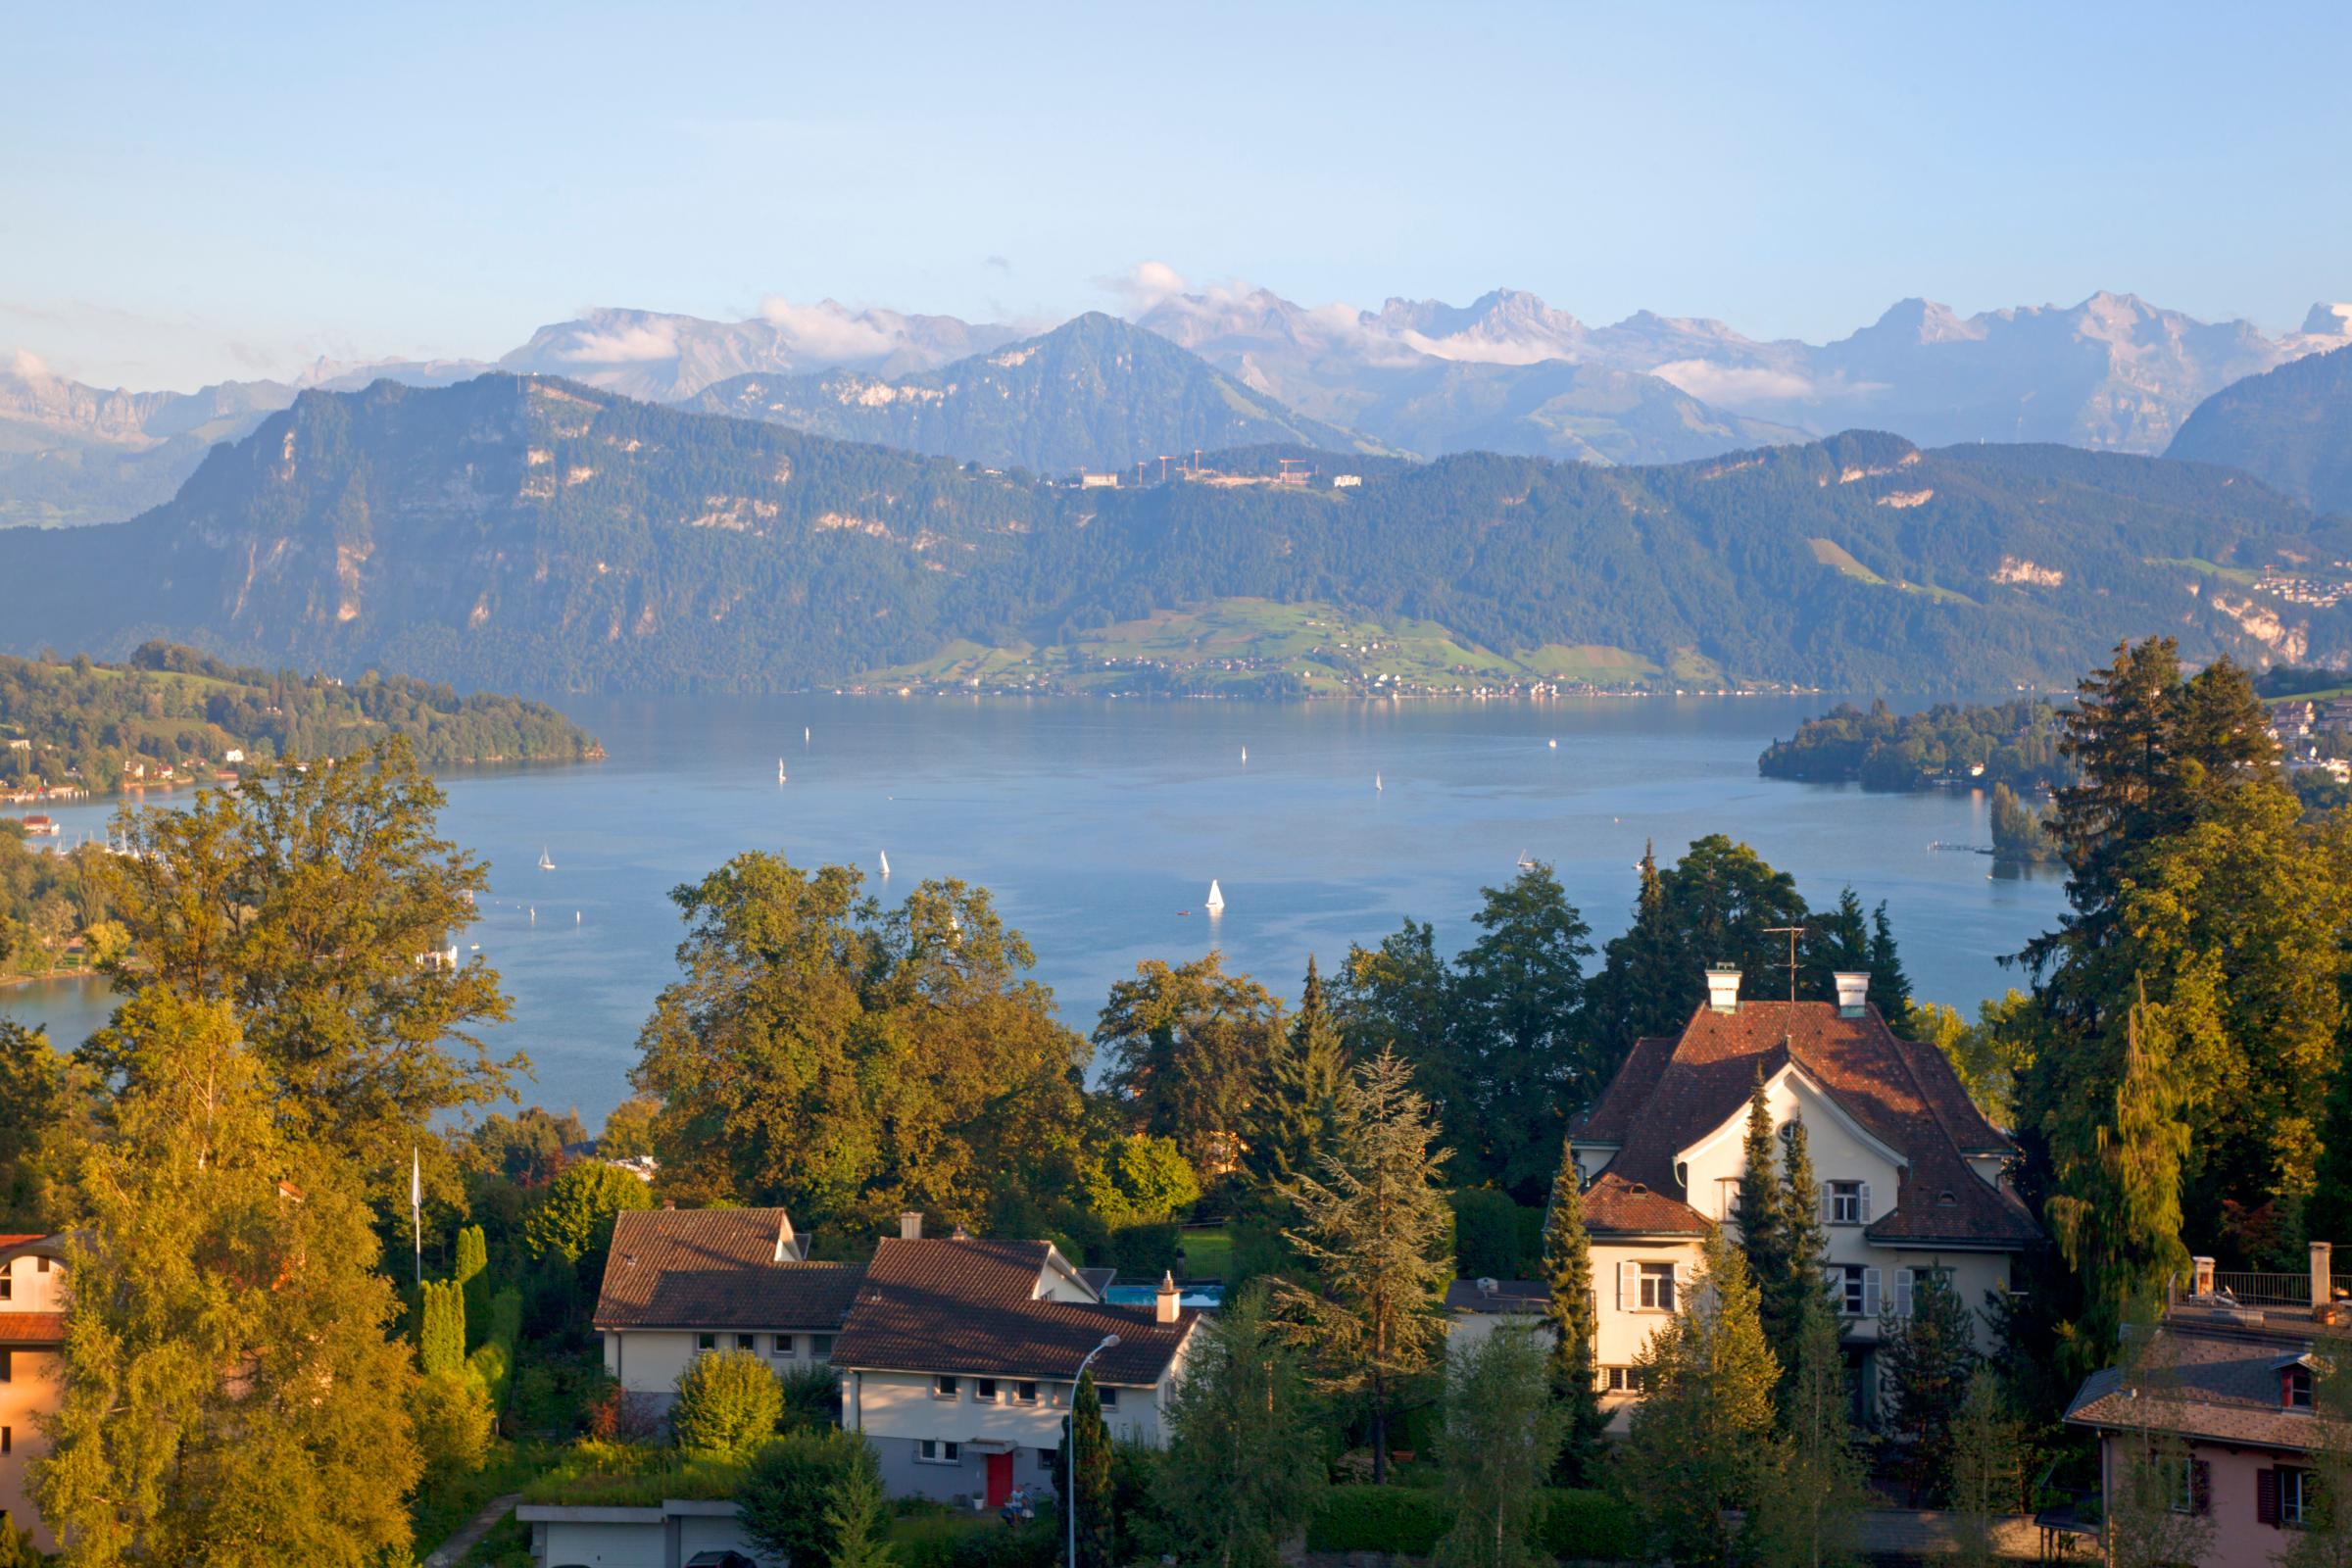 Switzerland, Lake Lucerne, View of Swiss Alps and Lake Lucerne